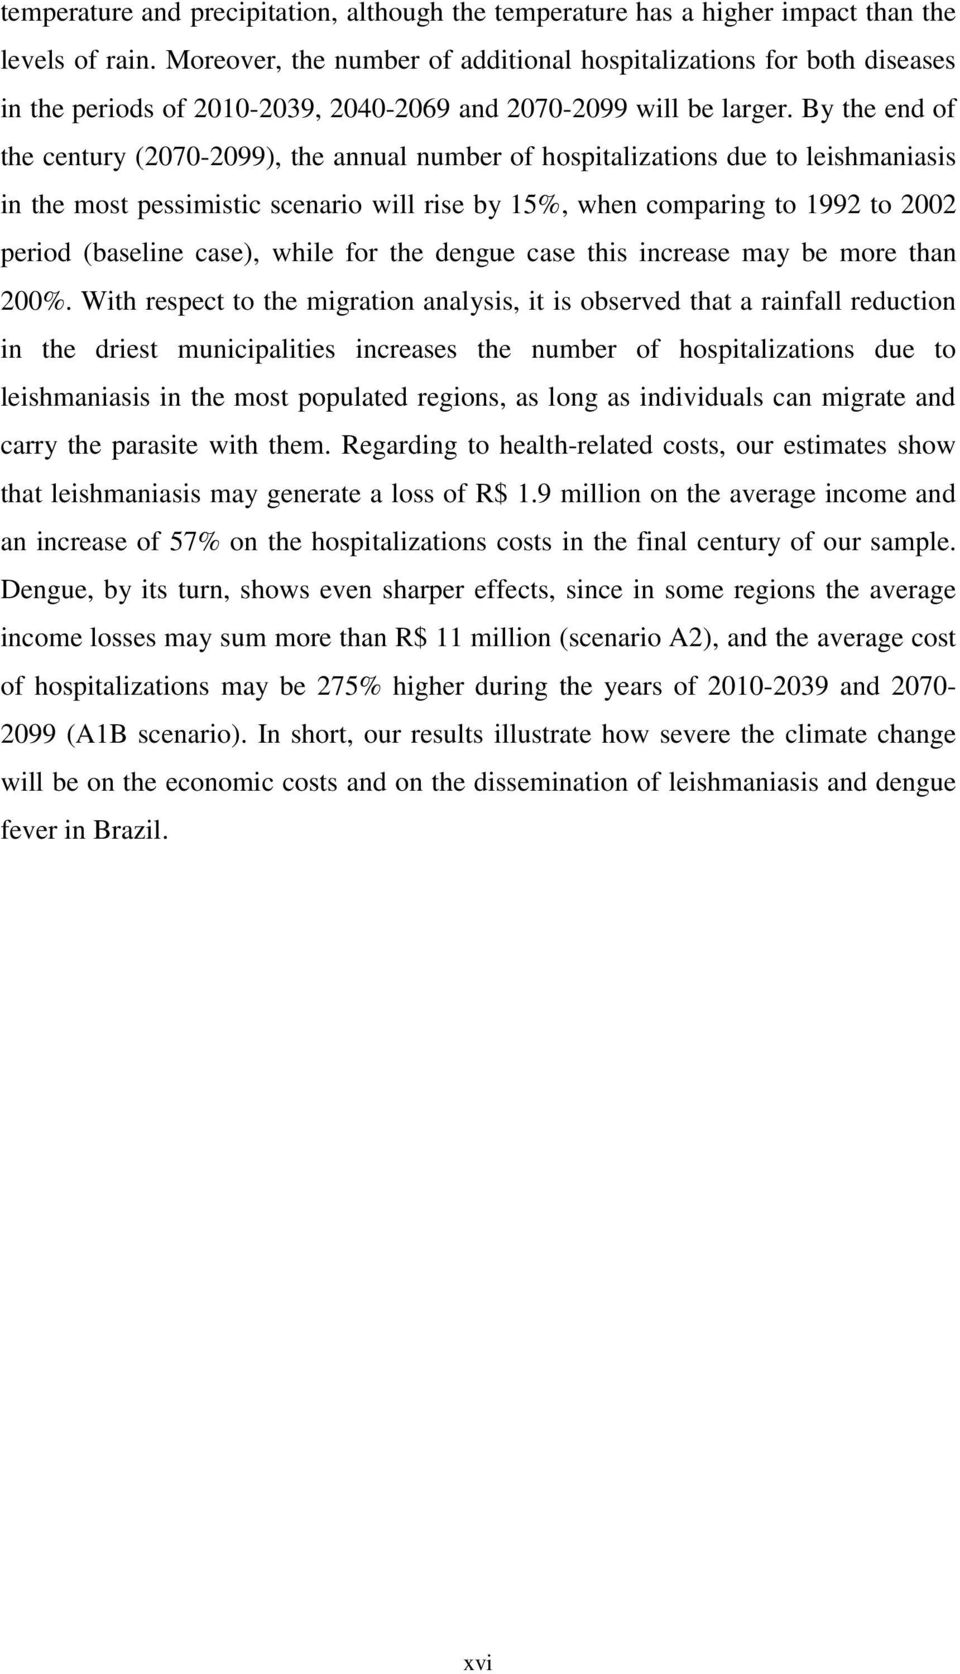 By the end of the century (2070-2099), the annual number of hospitalizations due to leishmaniasis in the most pessimistic scenario will rise by 15%, when comparing to 1992 to 2002 period (baseline